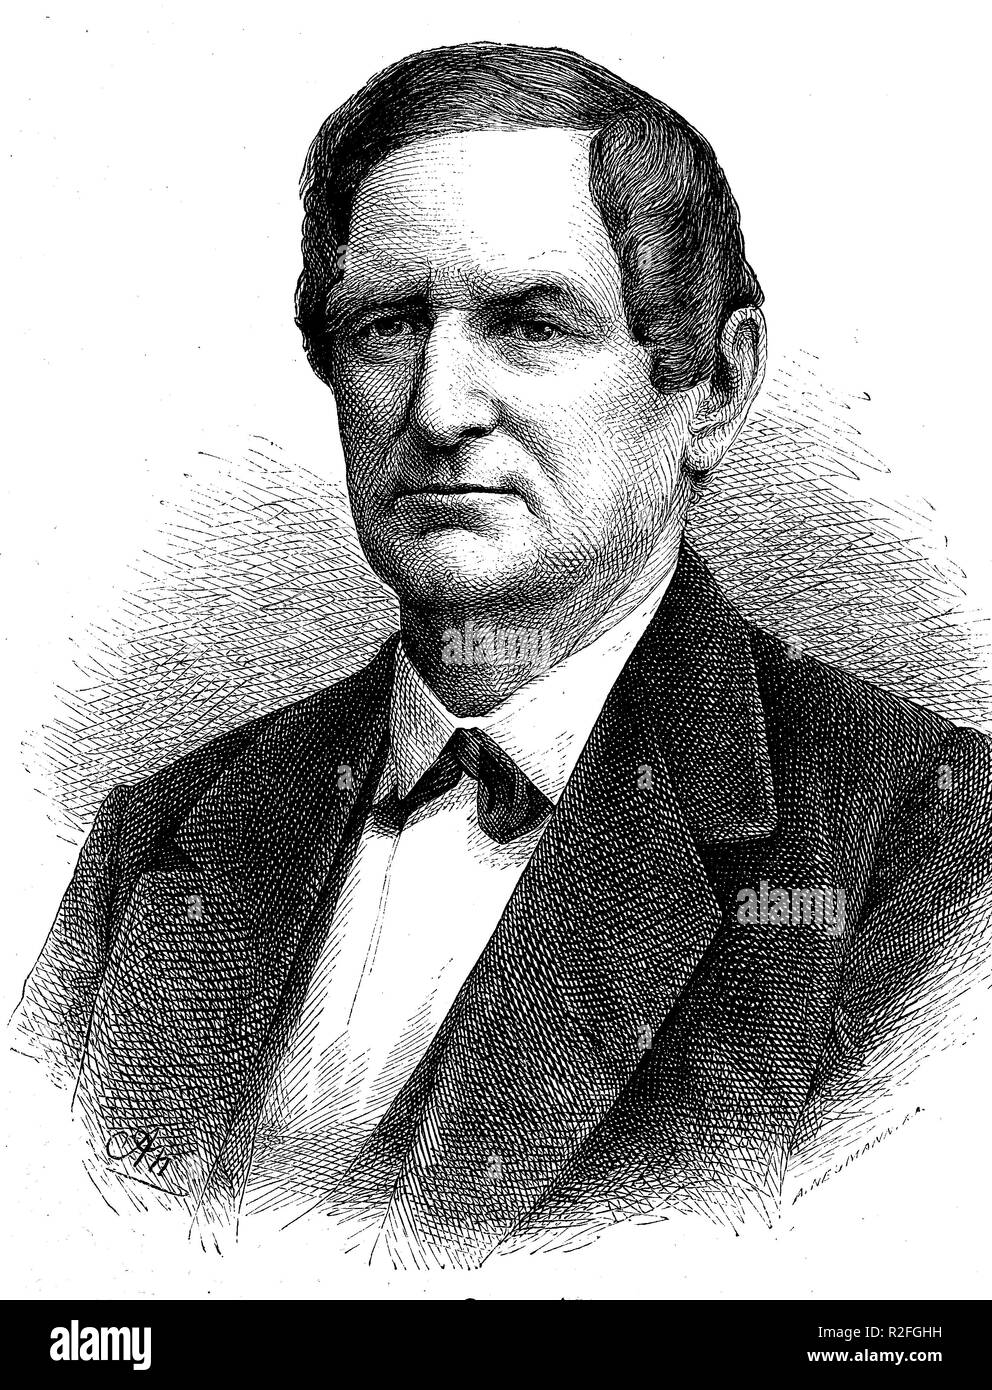 Digital improved reproduction, Franz GÃ¶tze, 1814-1888, german opera singer, from an original print from the 19th century Stock Photo